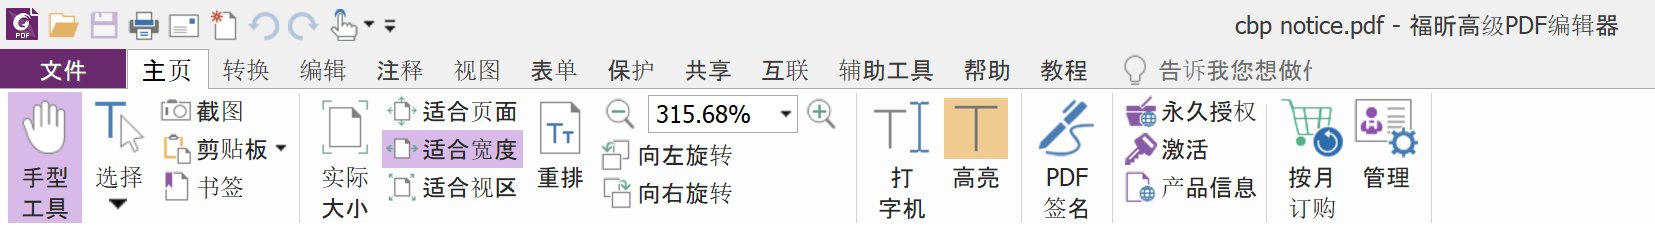 Windows 10 Chinese Display issue (some characters are displayed in Bold) after August 2019... 02d08c79-f270-4391-b8ea-0752bb08d6bb?upload=true.png